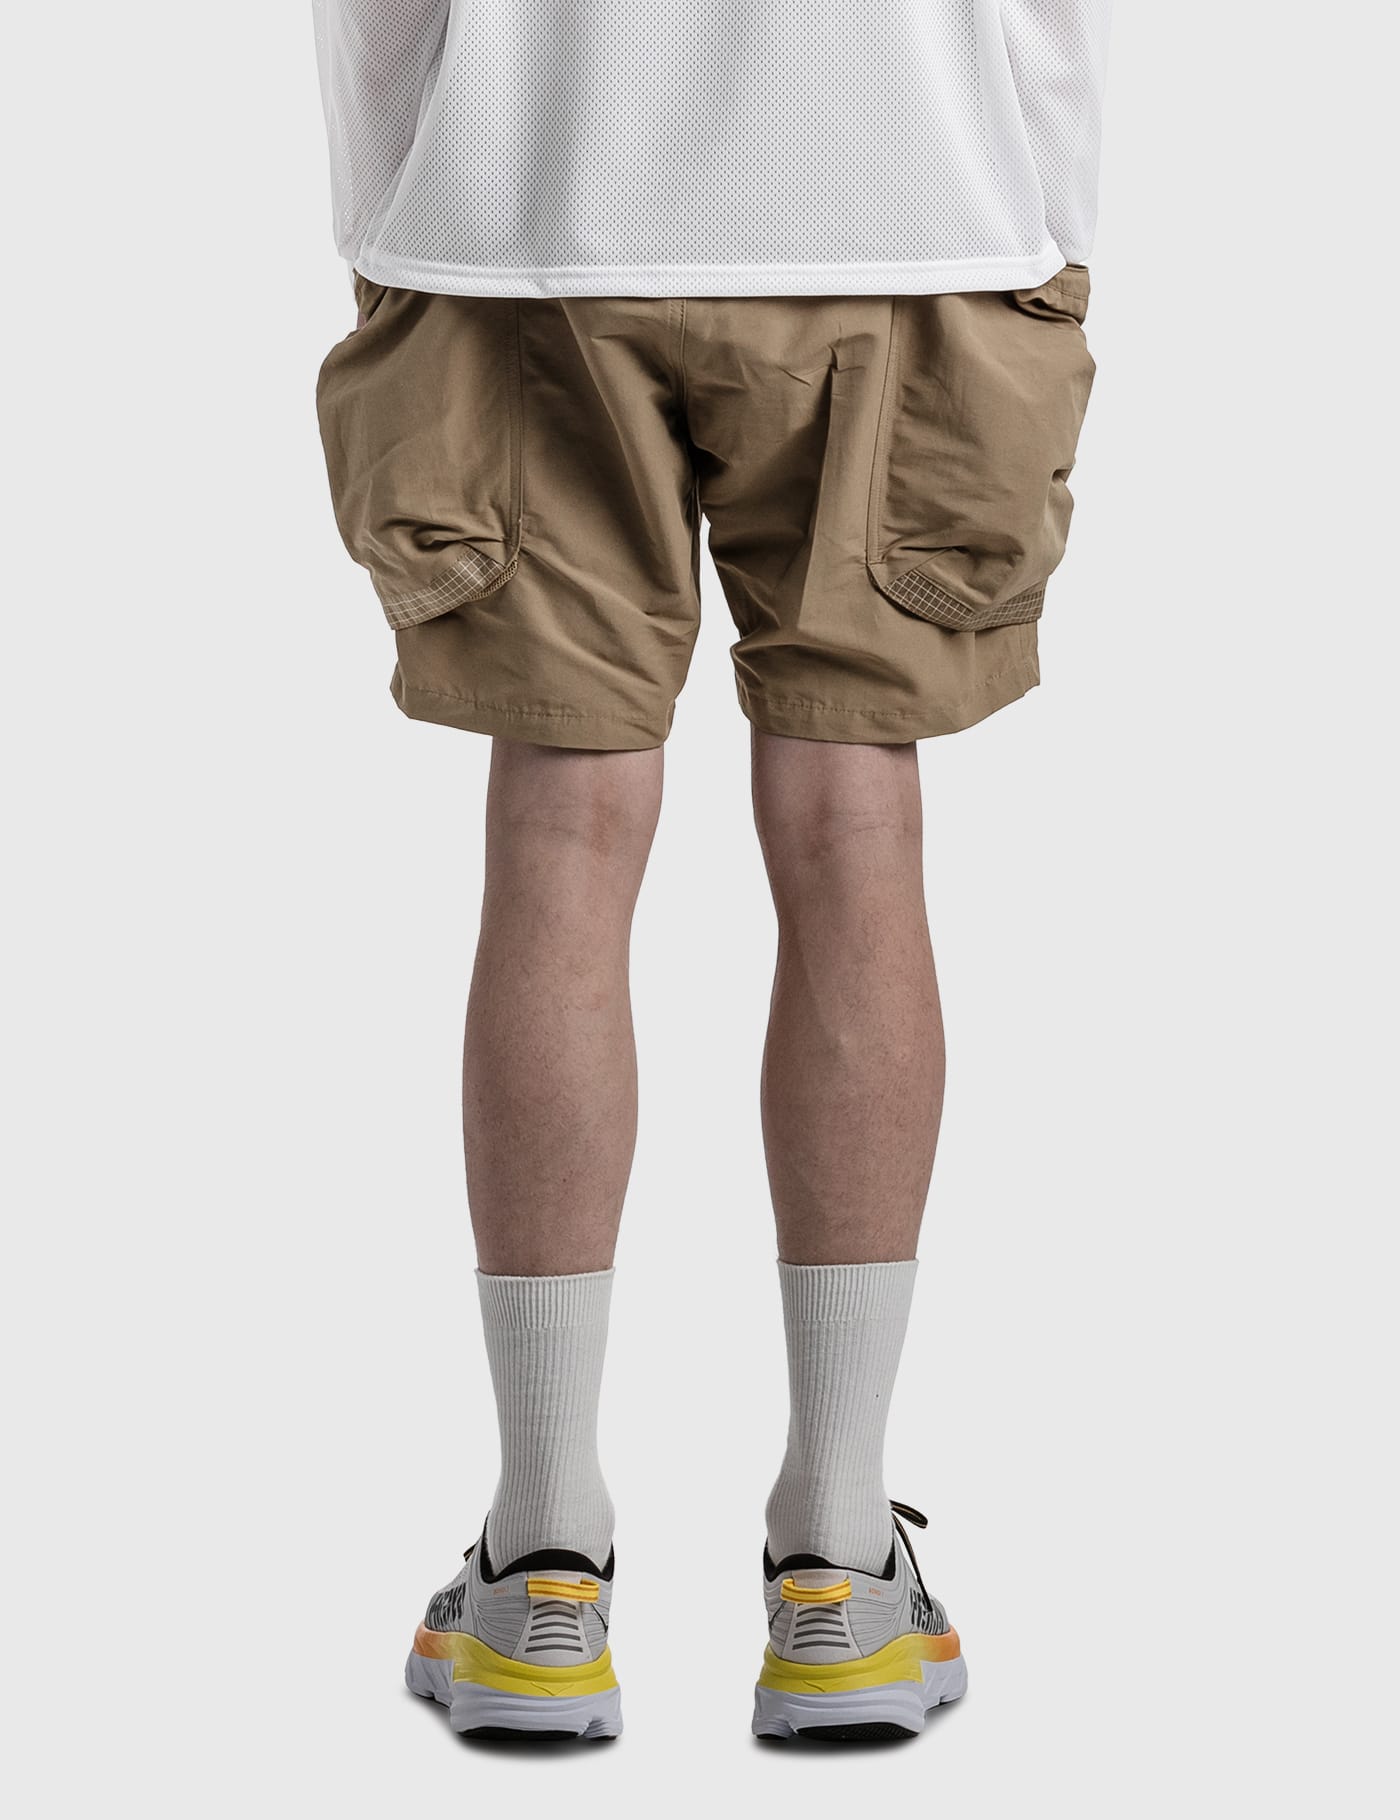 Comfy Outdoor Garment - Activity Shorts | HBX - Globally Curated 